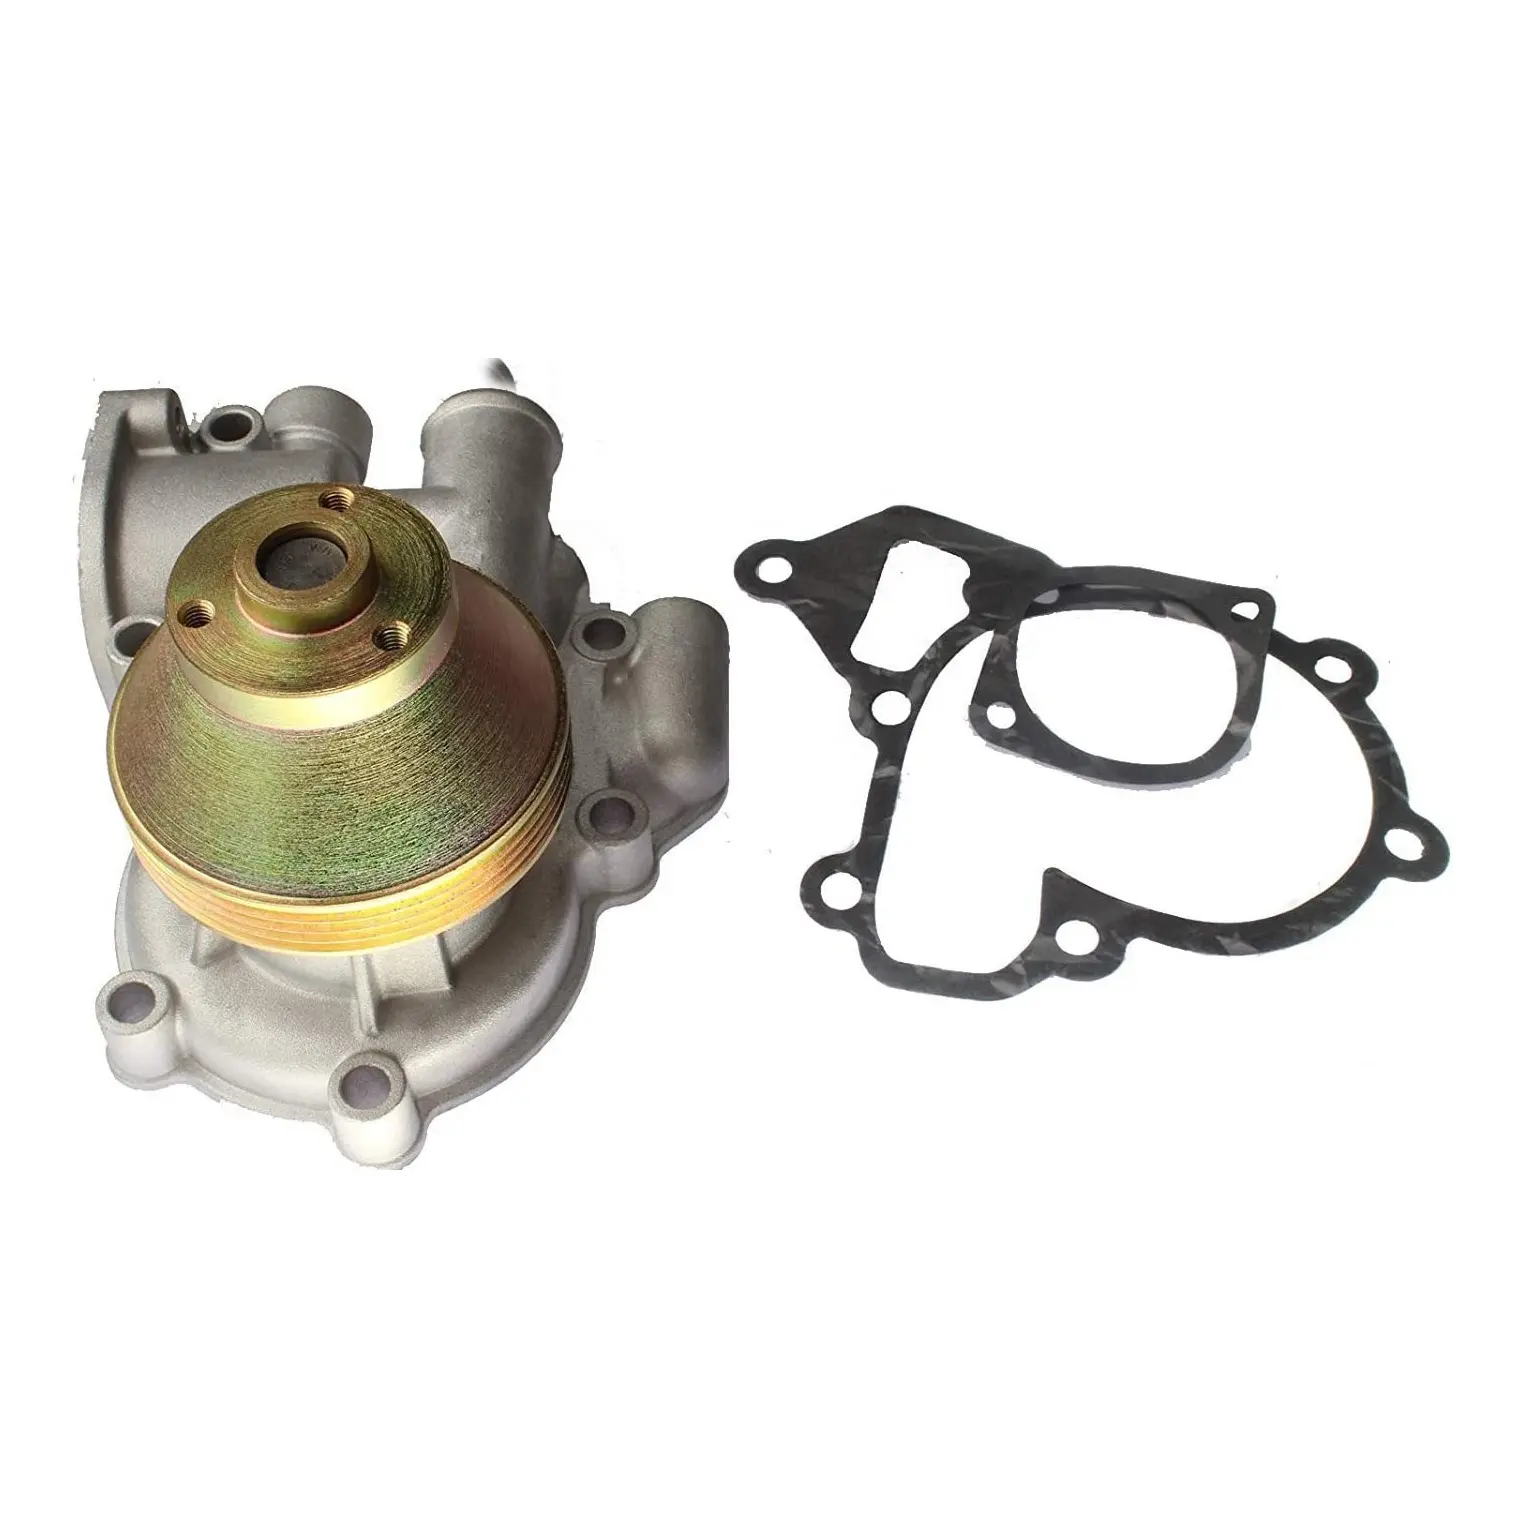 Replacement Lister Petter Water Pump 750-40627 75040627 750/40627 for LP LPW LPWT LPWS machinery engines